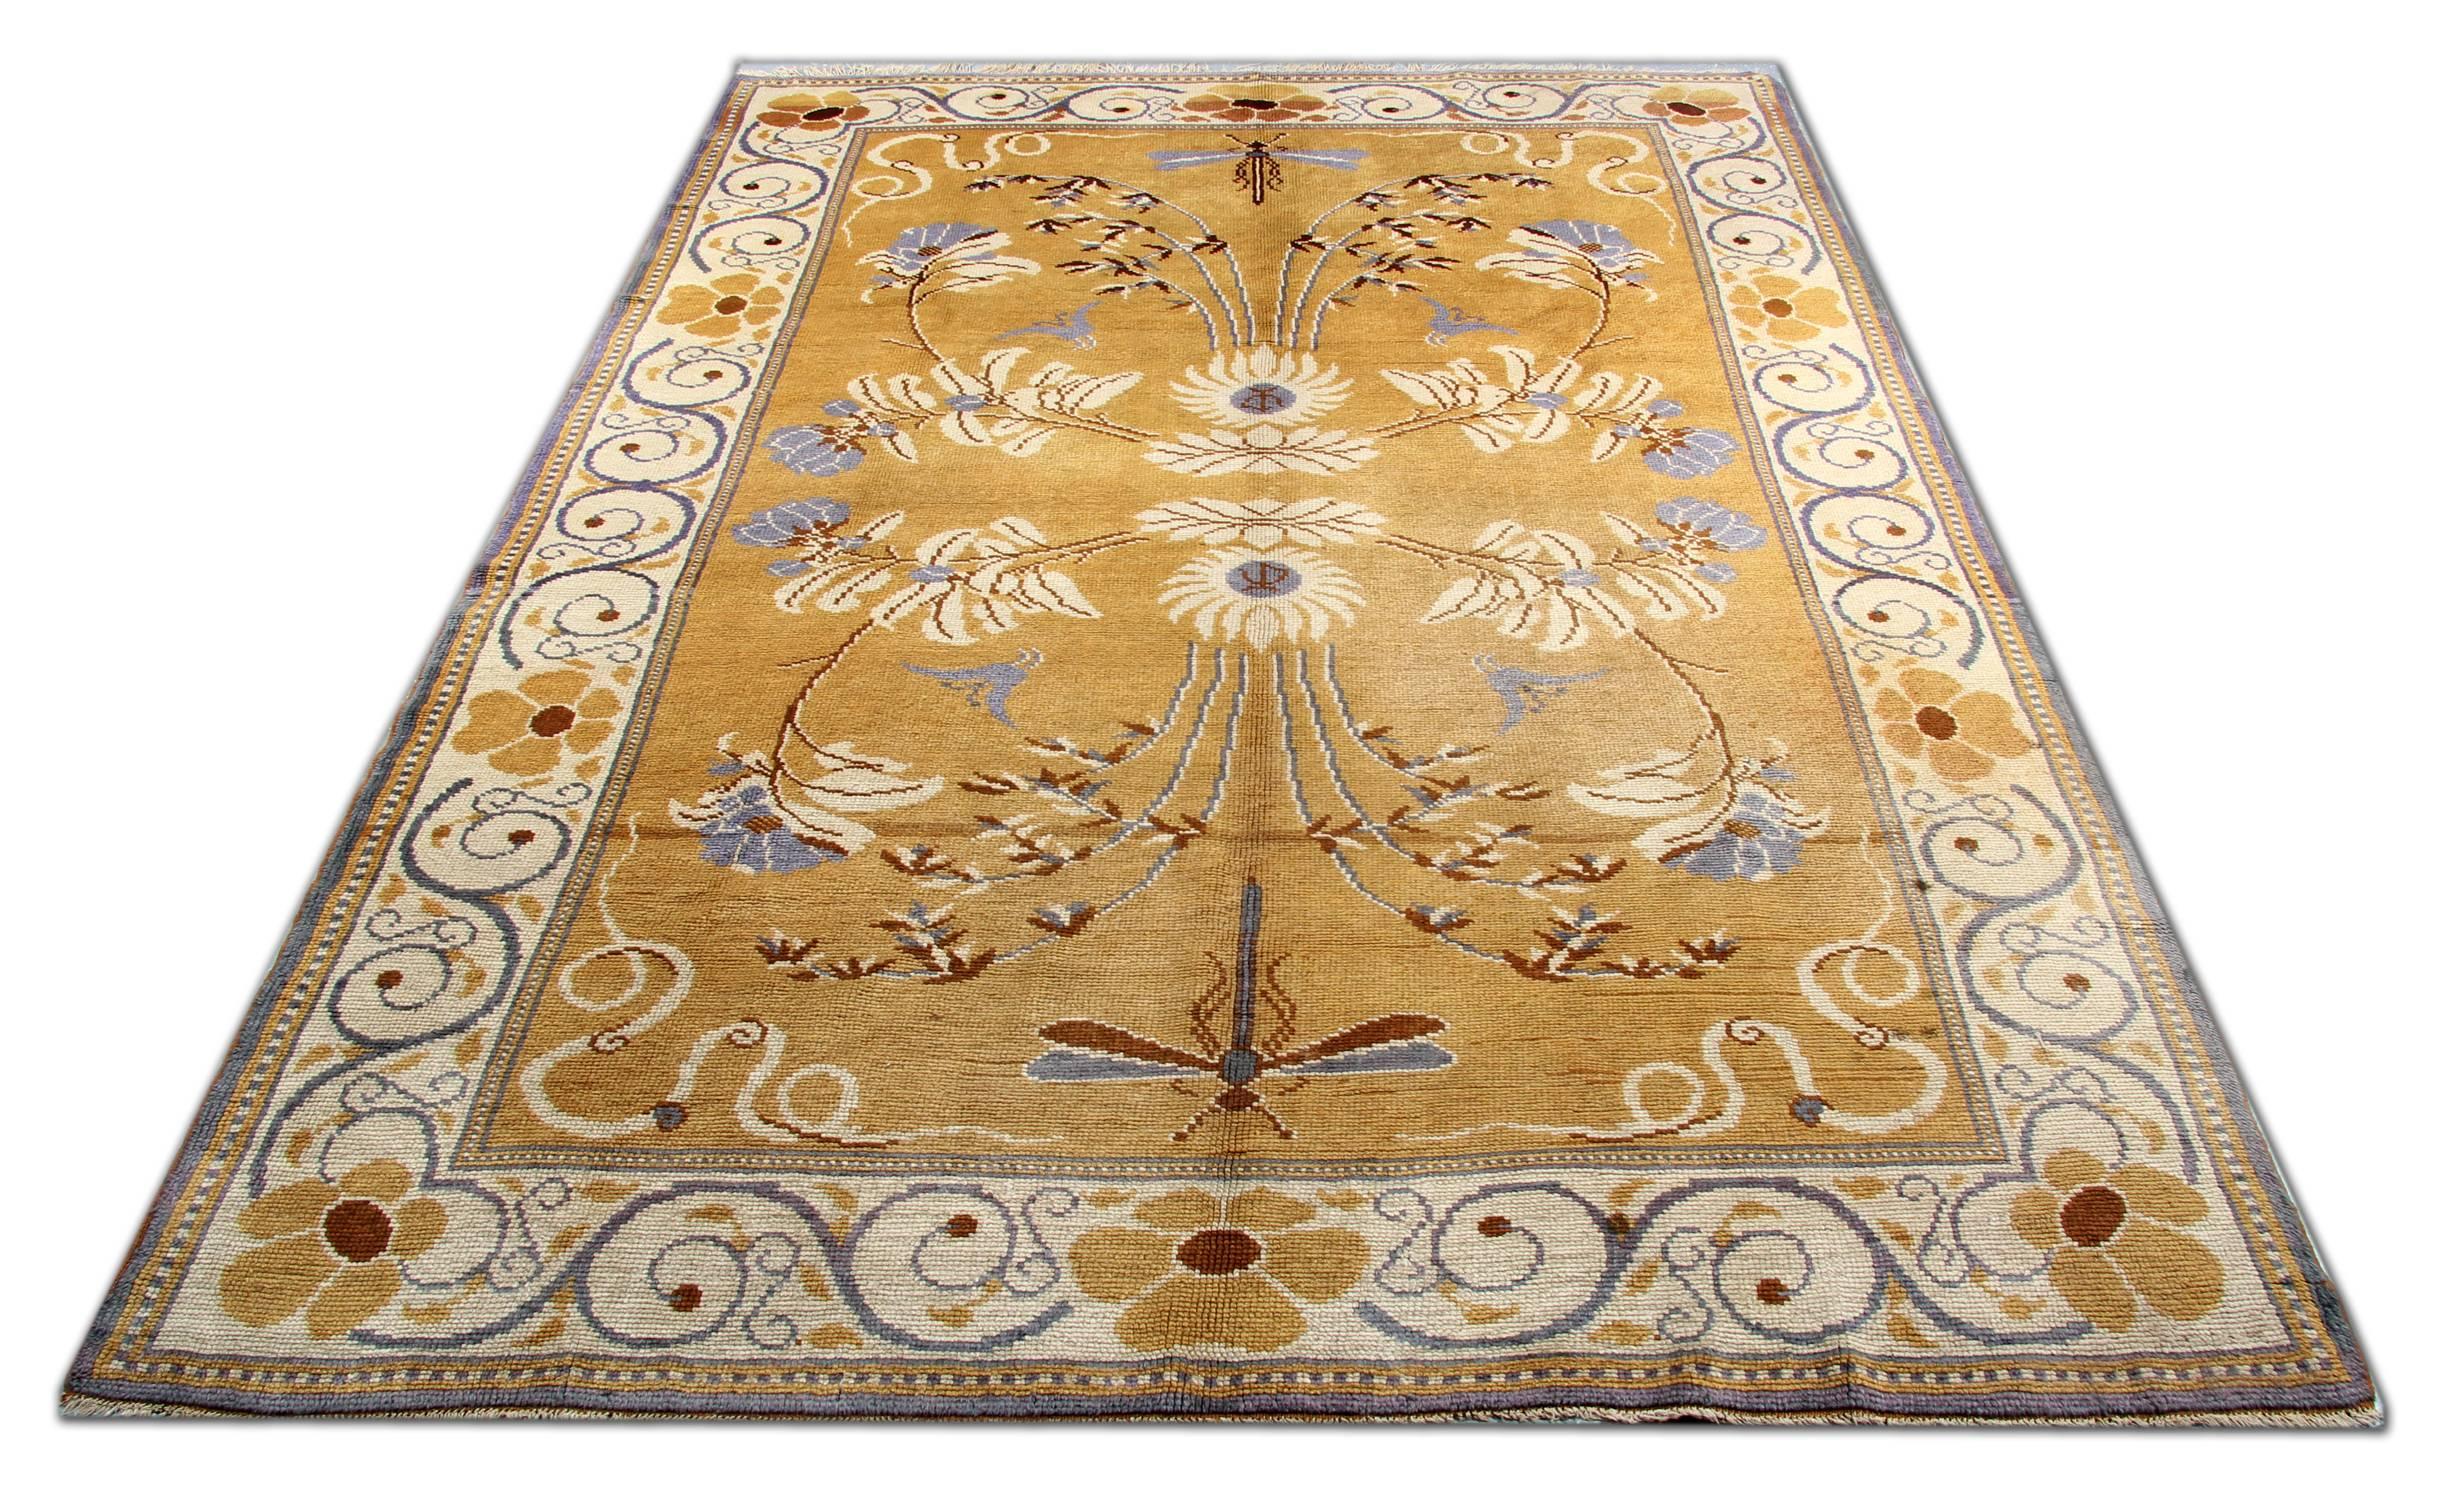 The handmade carpet Art and Crafts movement grew out of the wool rugs design revolution spawned by English artist like William Morris. In Ireland, this movement gradually focuses on native Celtic traditions from the Middle Ages and eventually